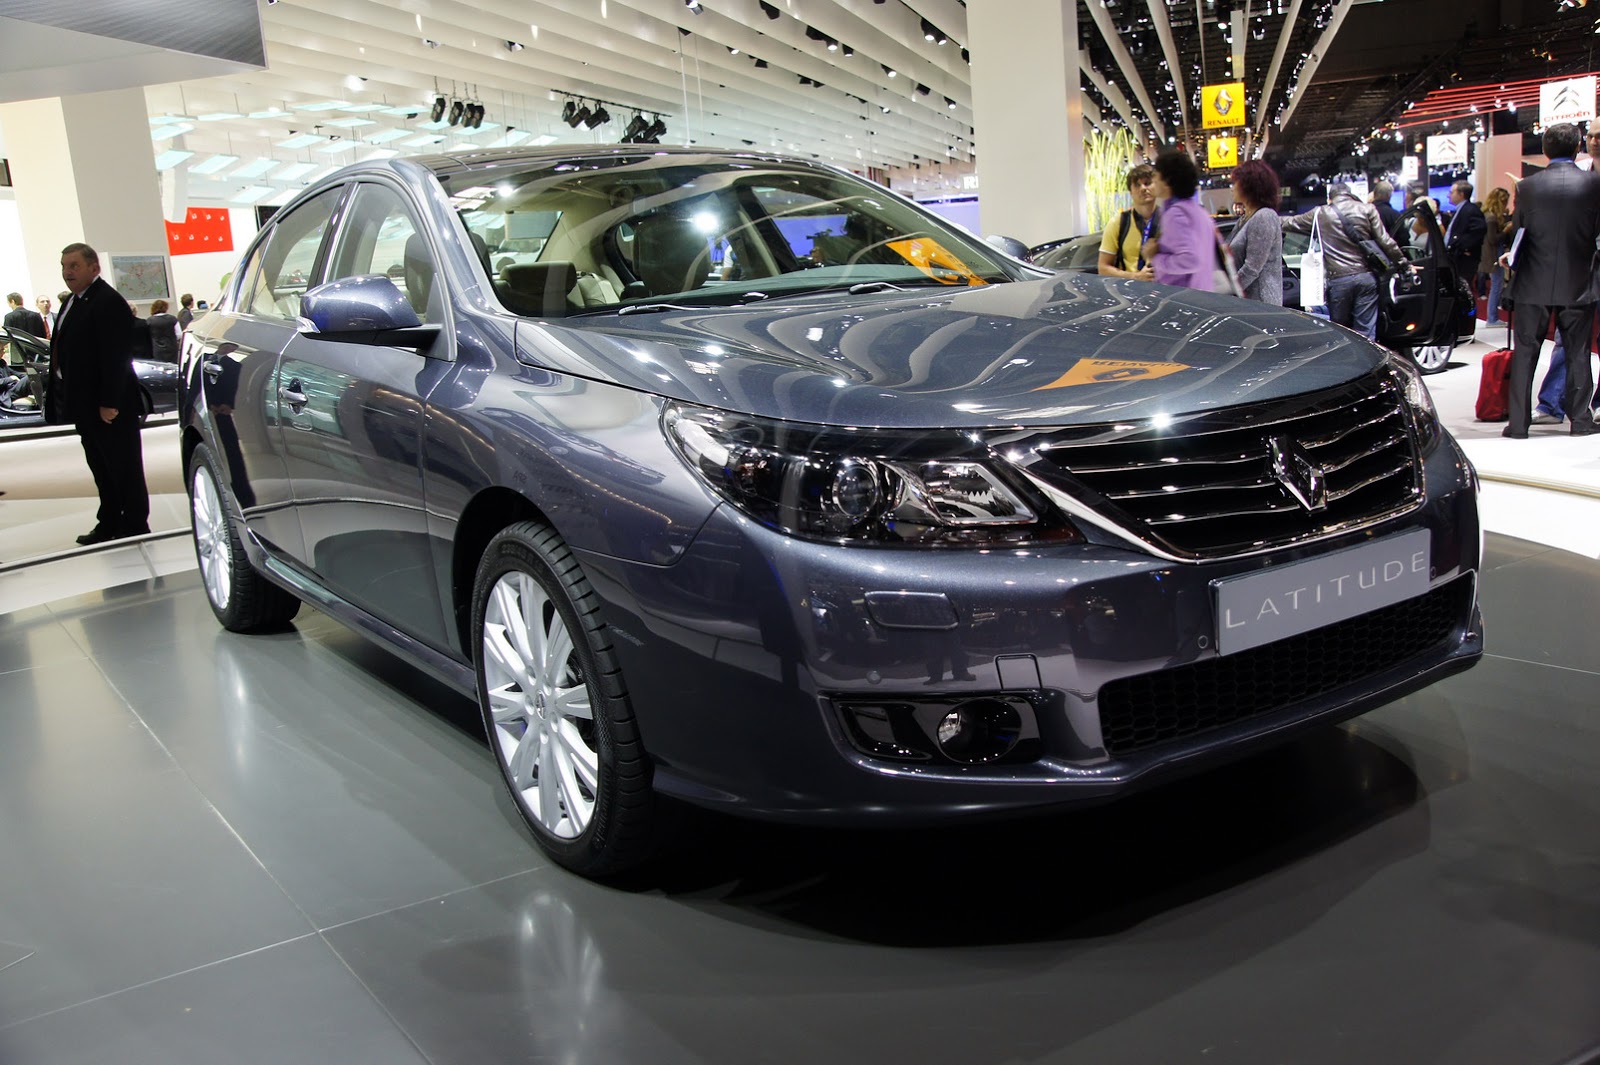 Plans For New Mitsubishi Midsize Sedan From Renault-Nissan Reportedly ...